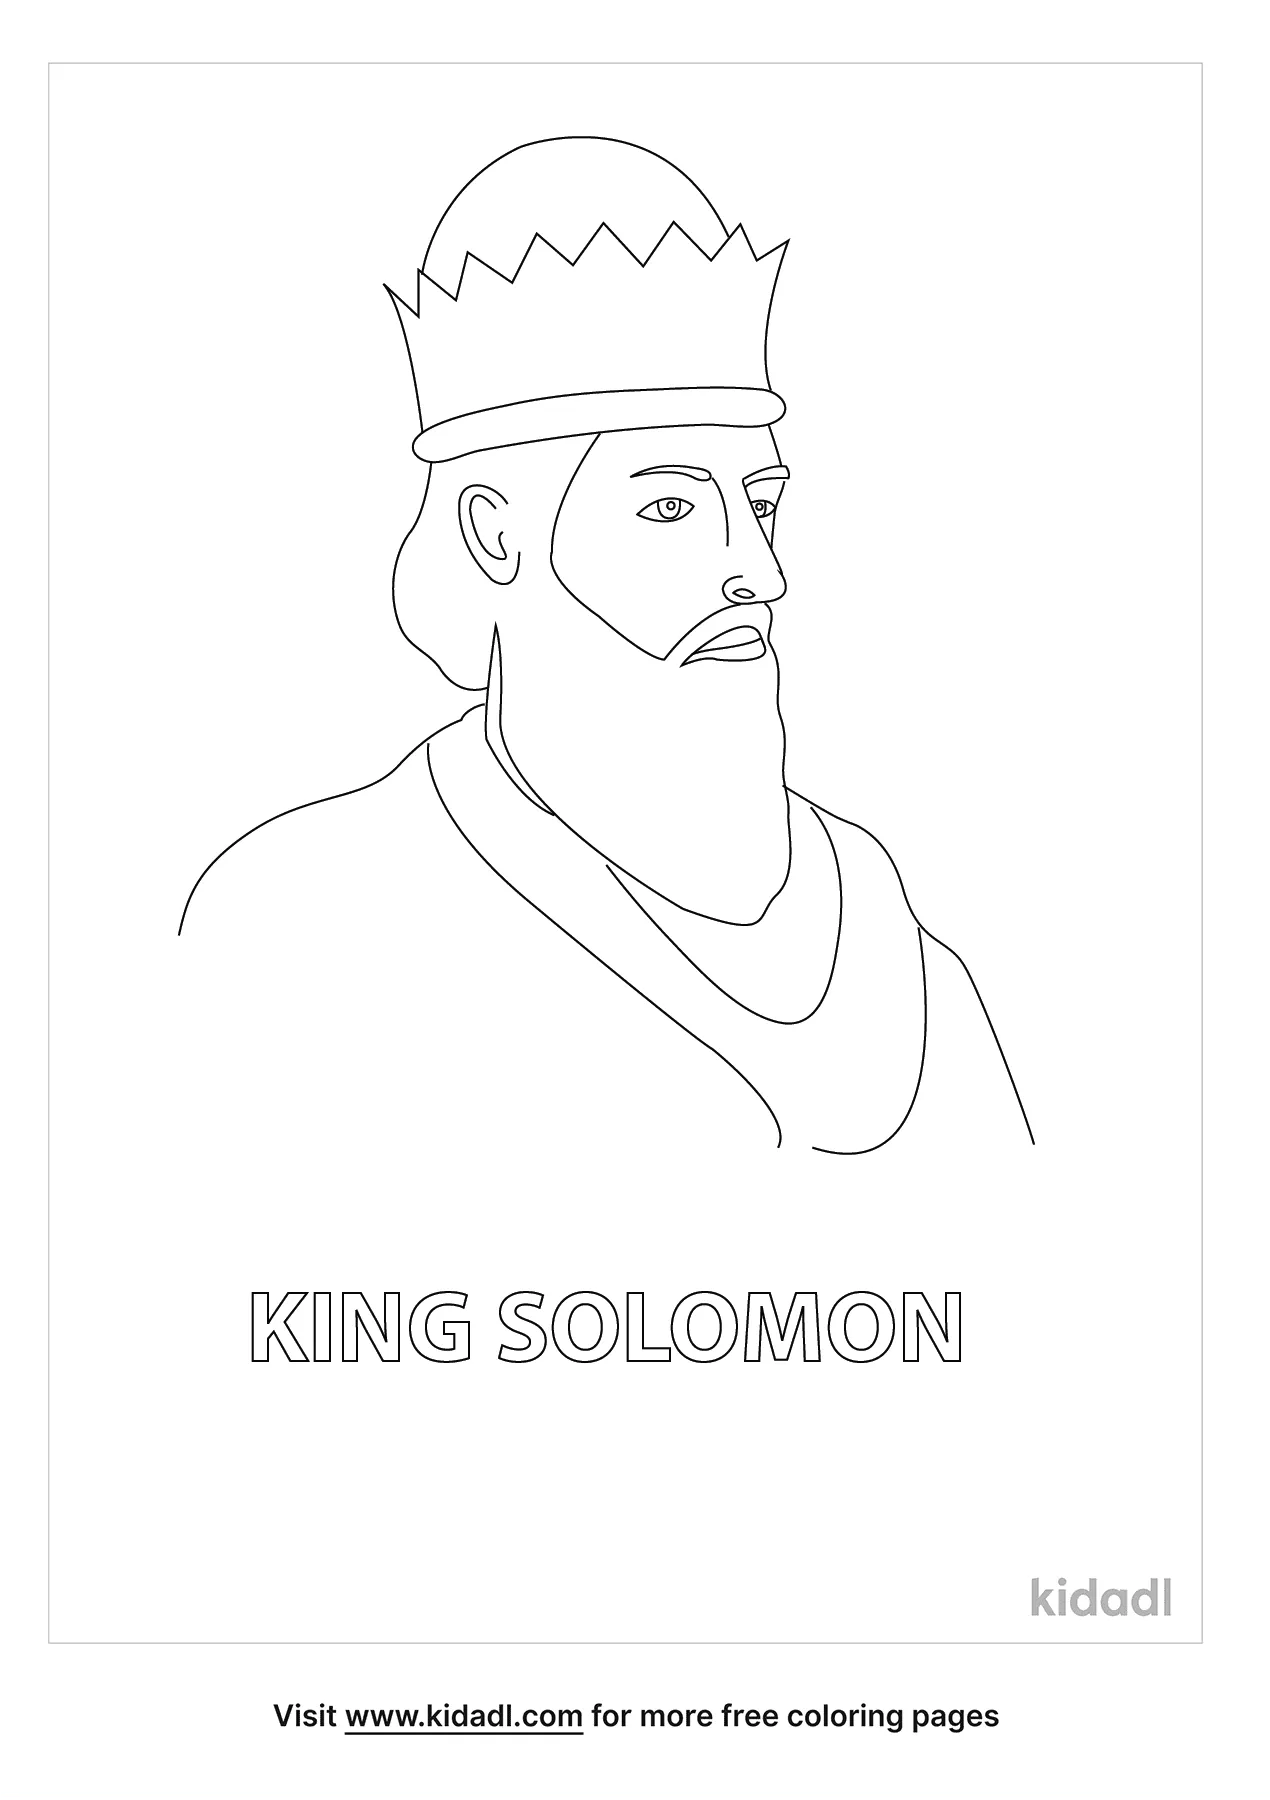 Free king solomon coloring page coloring page printables